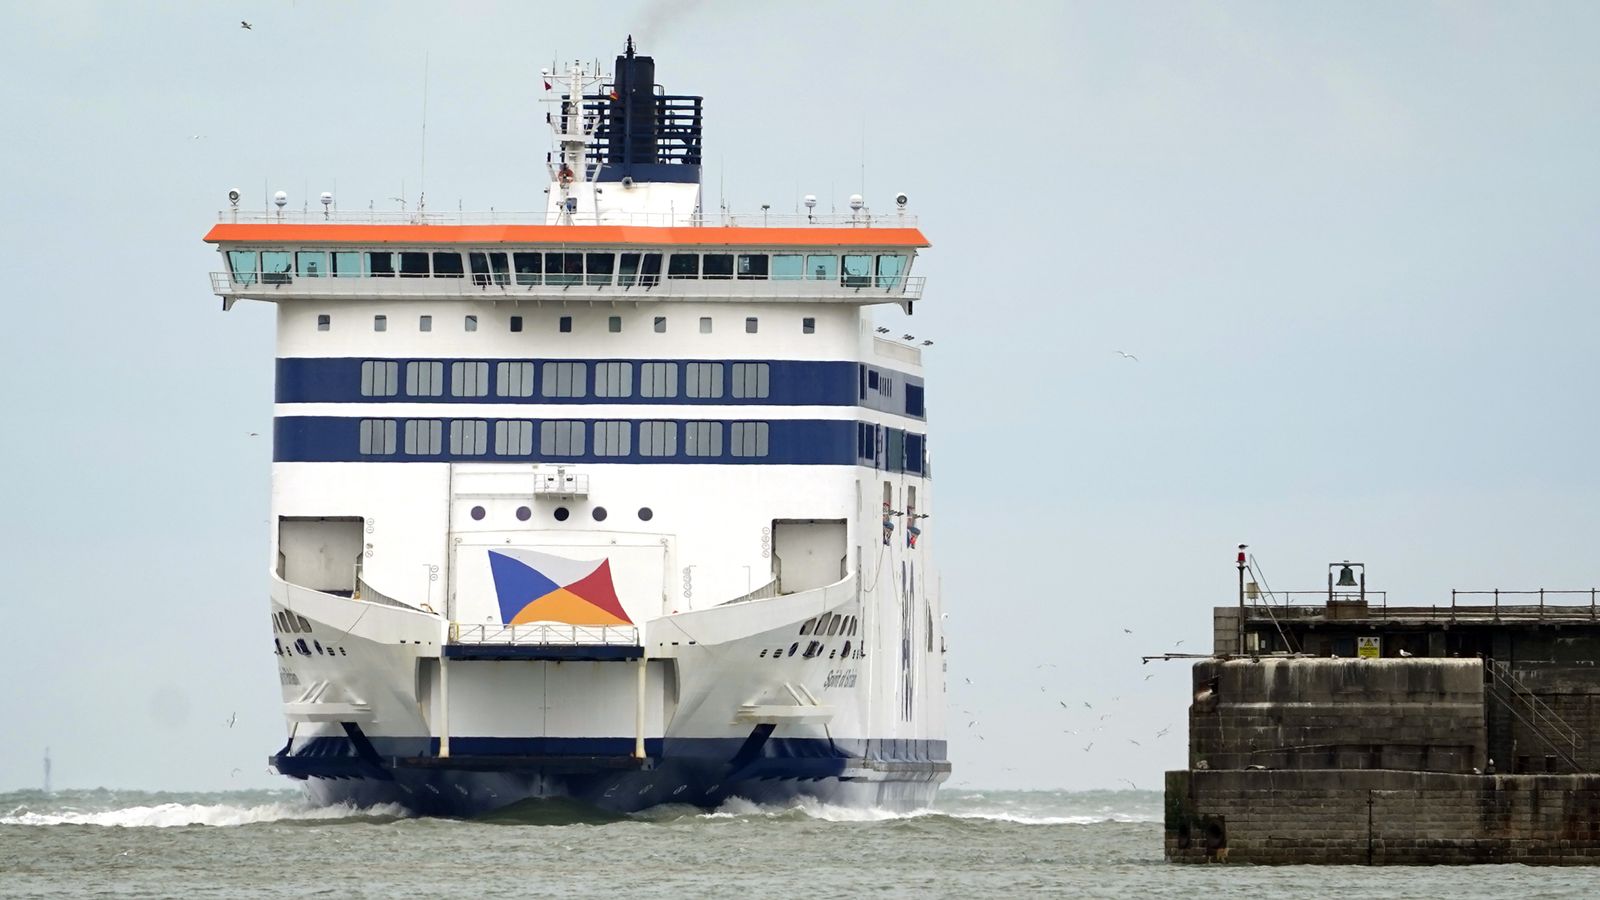 Ferry services to and from Calais suspended as national strike begins in France